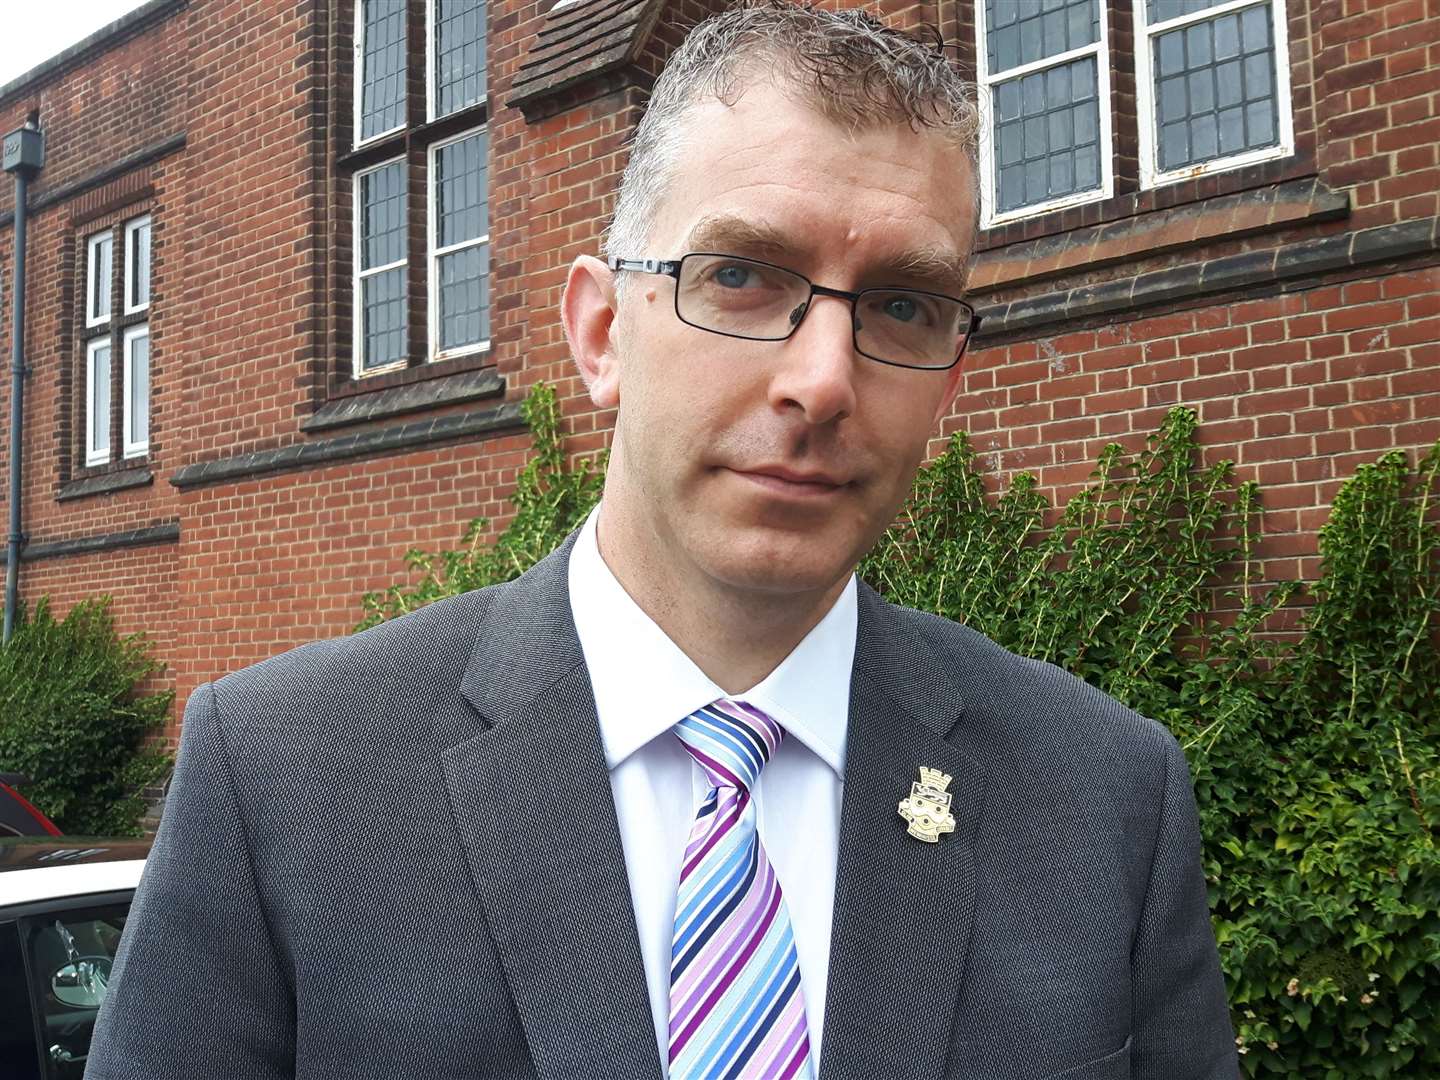 Head teacher Mark Tomkins sent out a statement yesterday